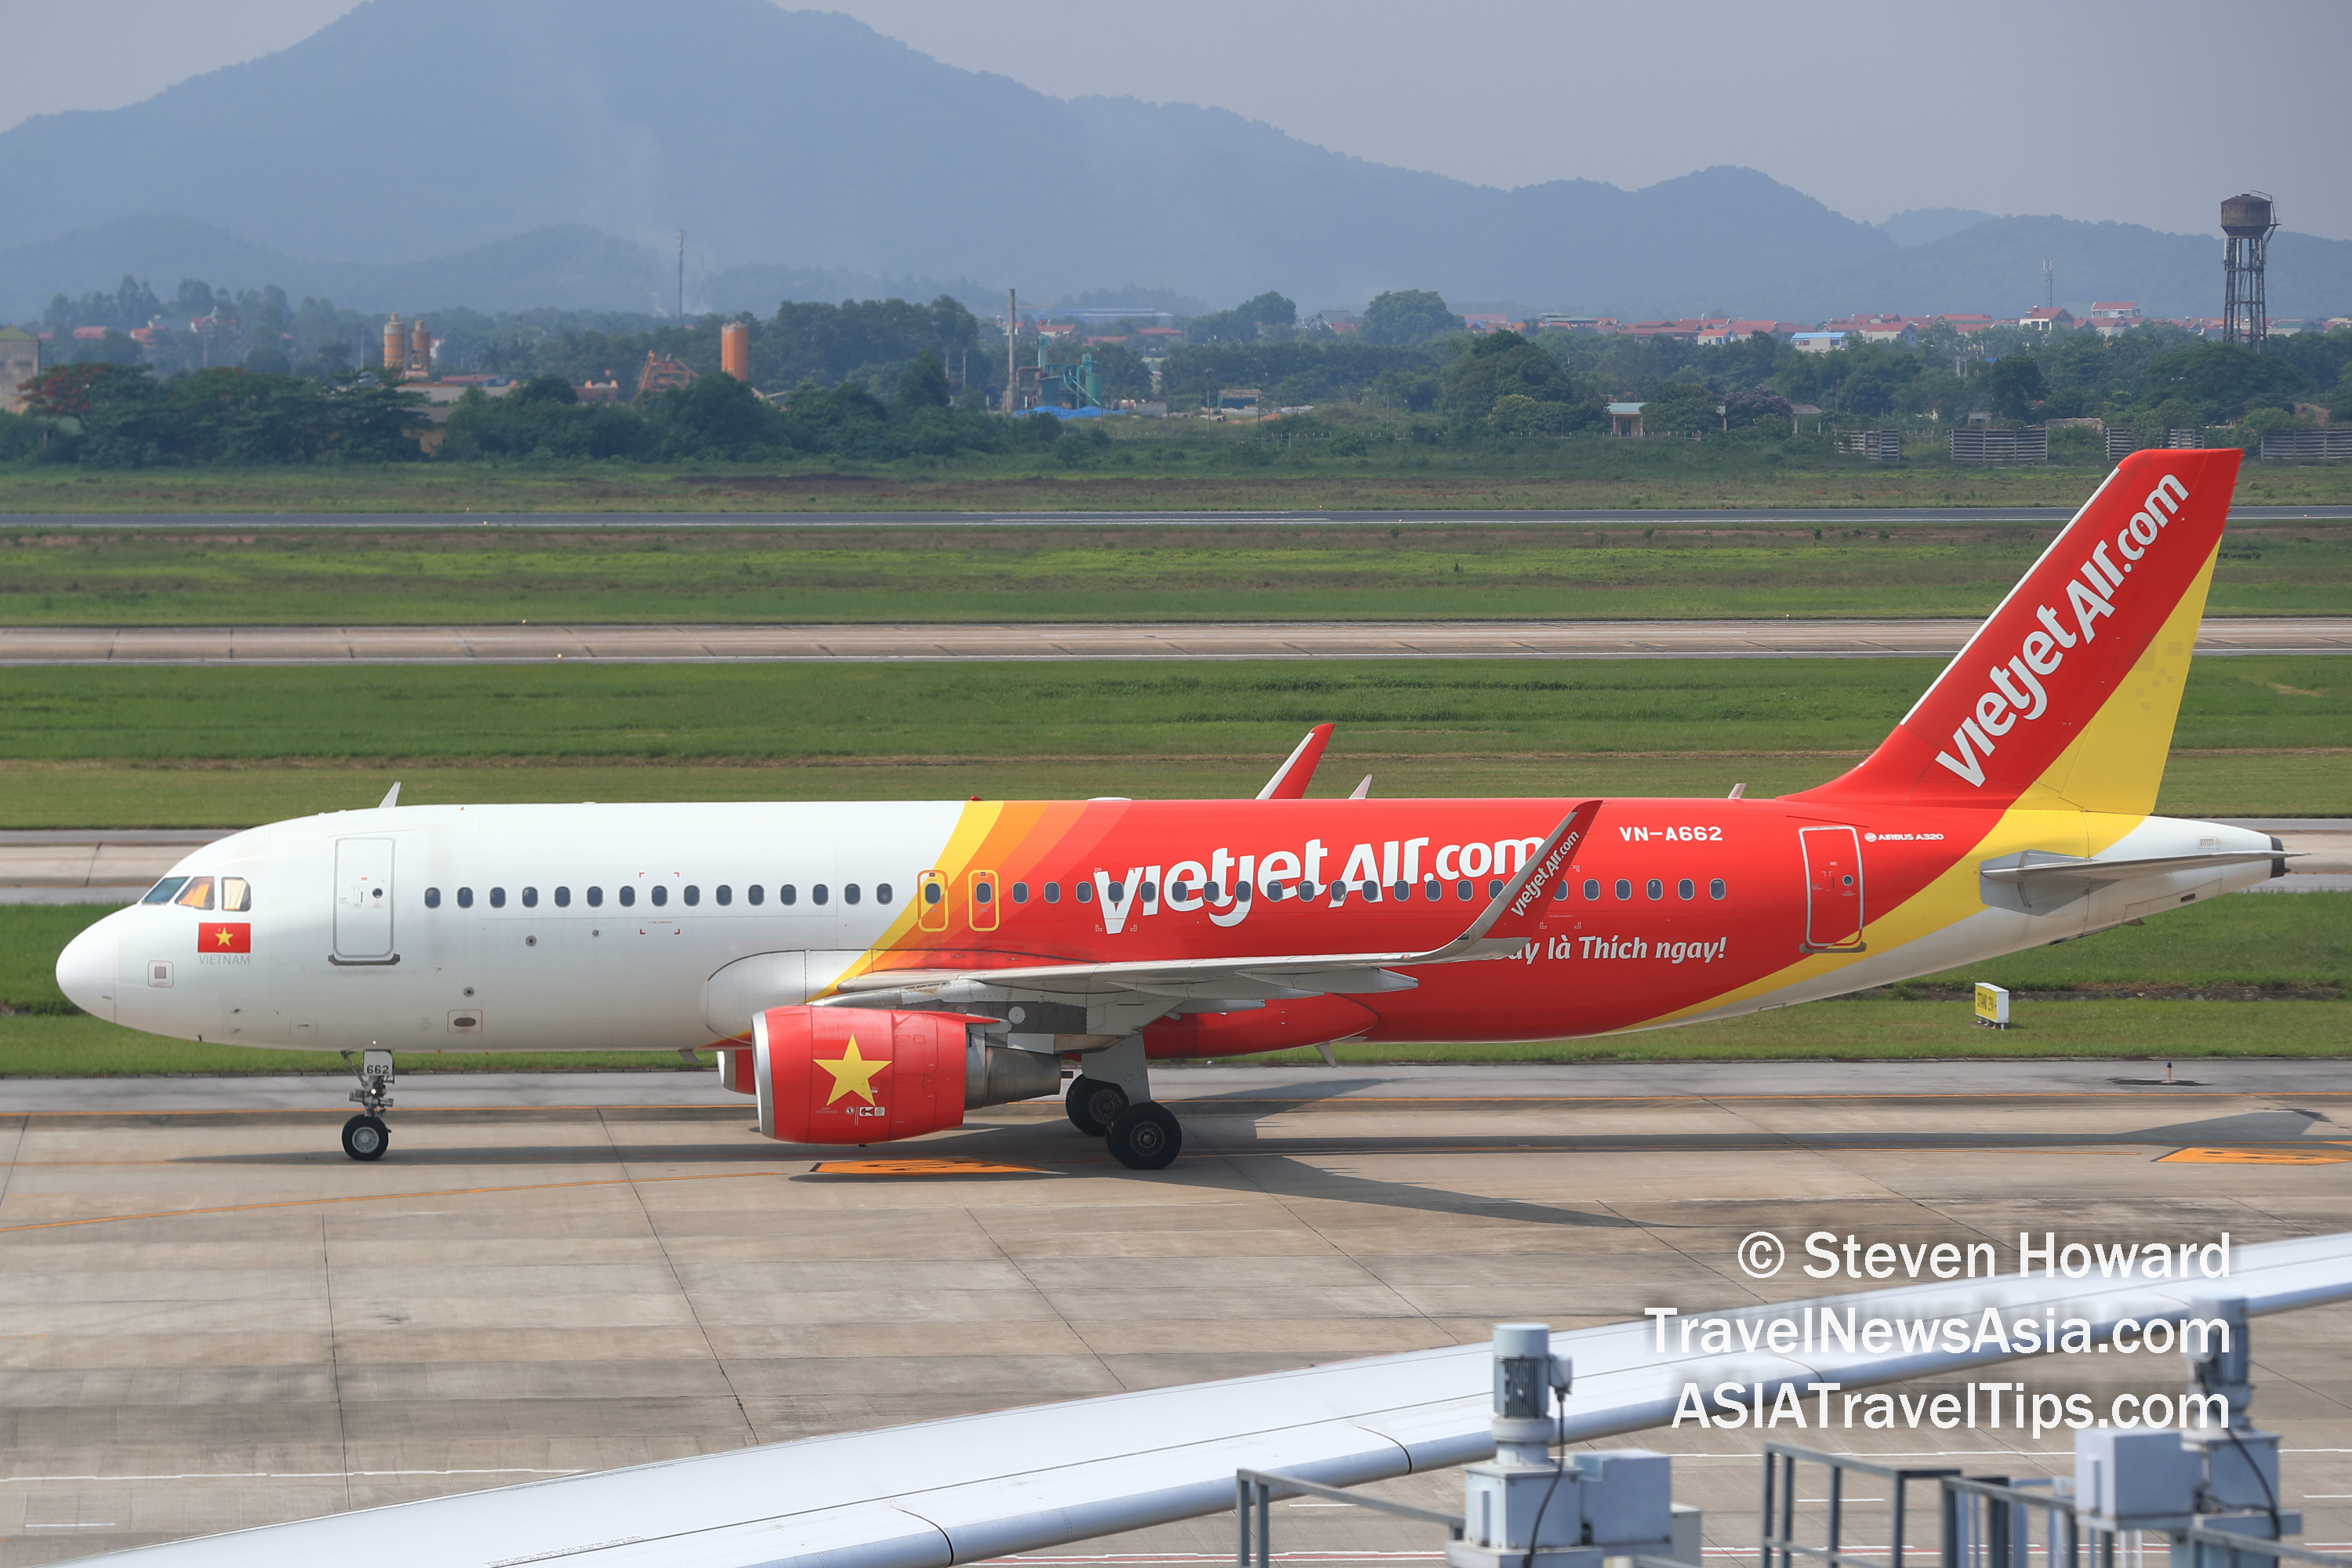 Vietjet Airbus A320 reg: VN-A662. Picture by Steven Howard of TravelNewsAsia.com Click to enlarge.